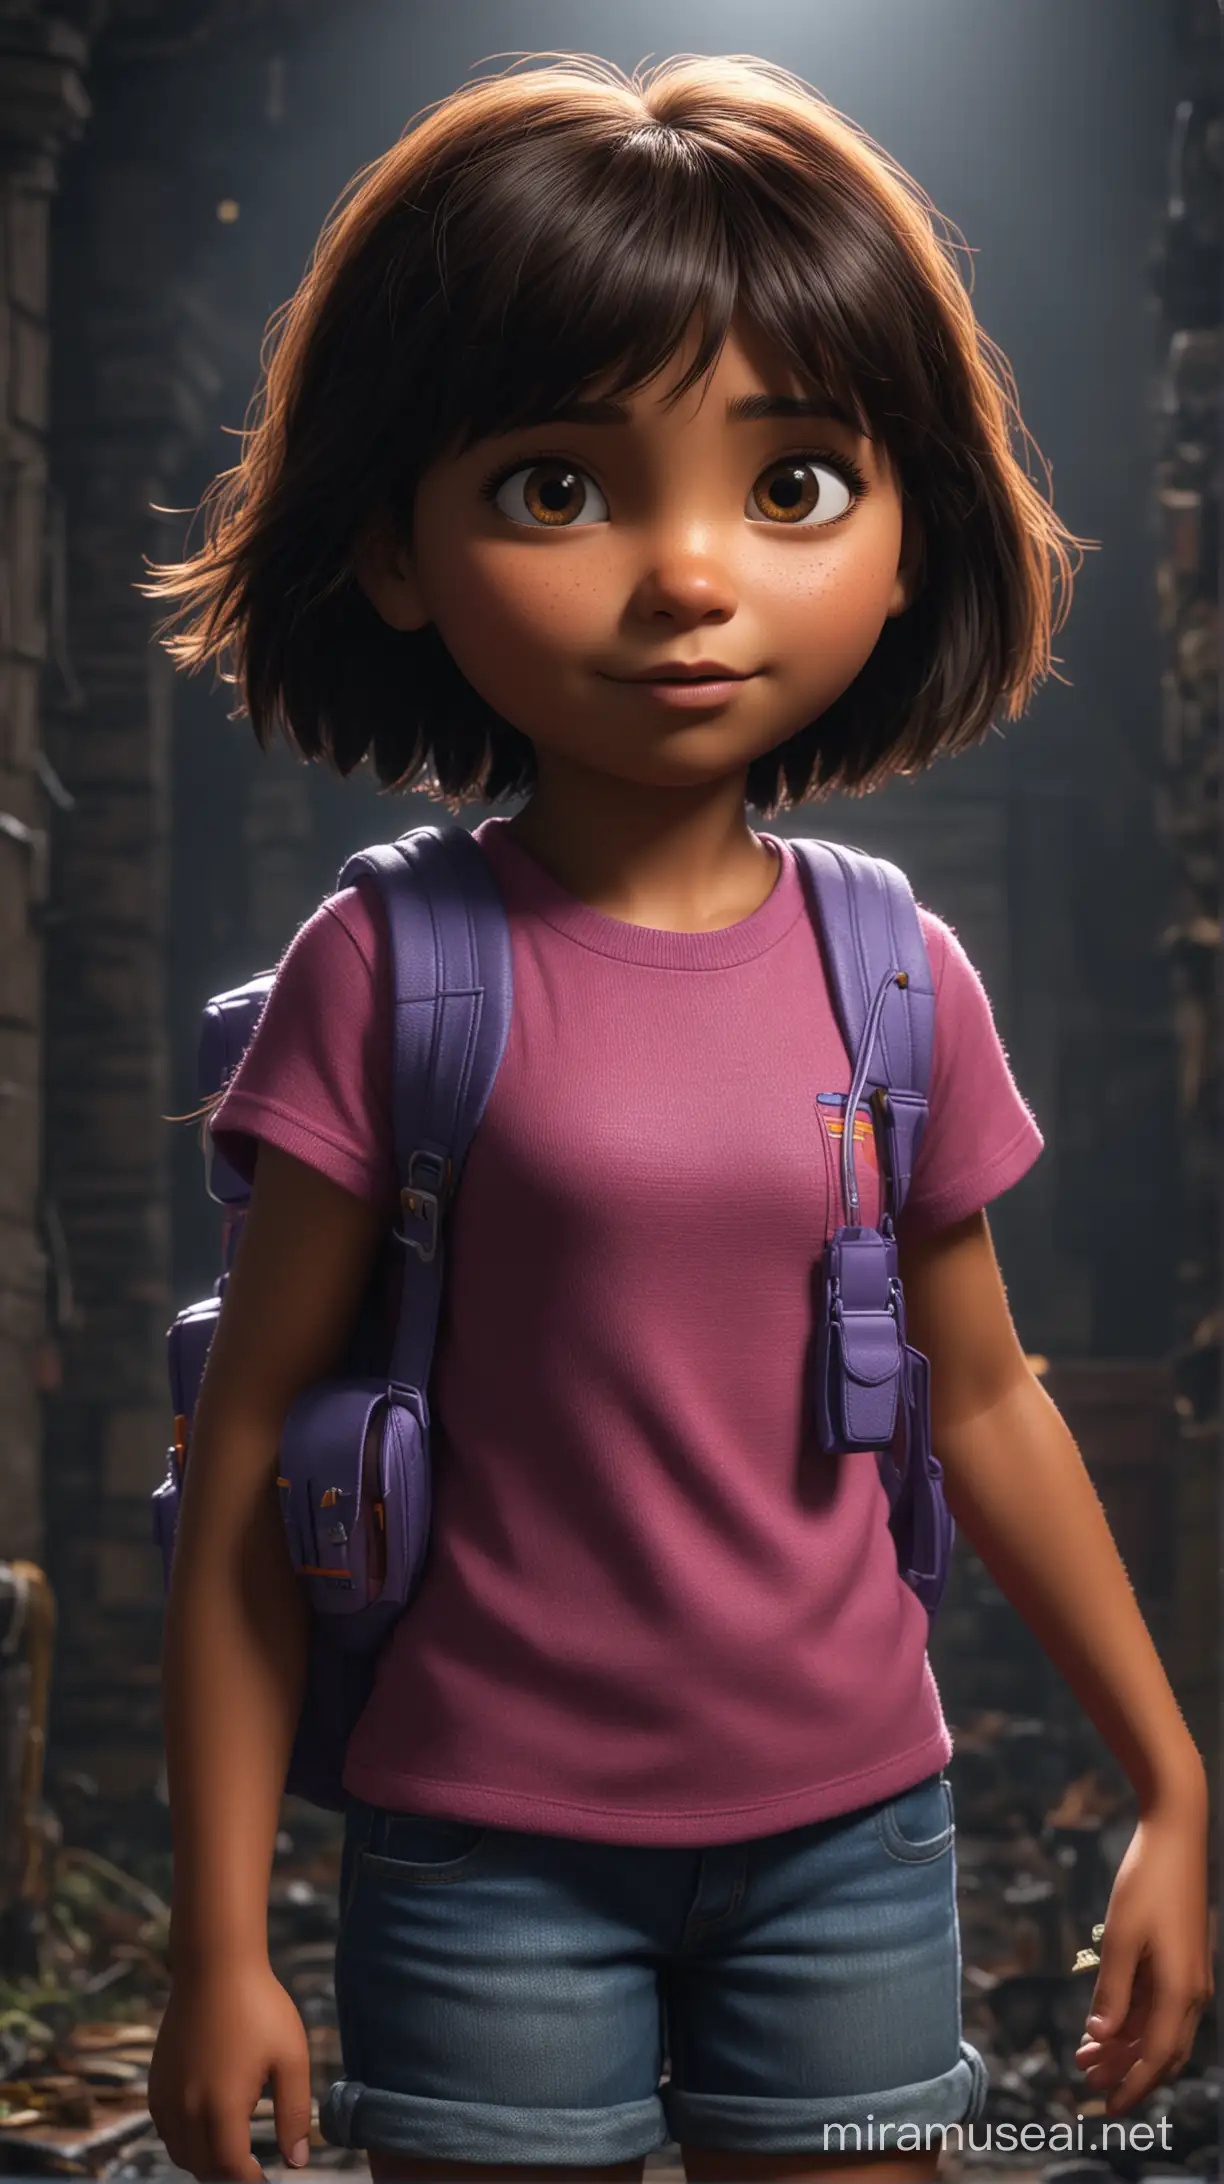 Dora the explorer darkness Electronic, Photo realistic, cinematic, HDR.